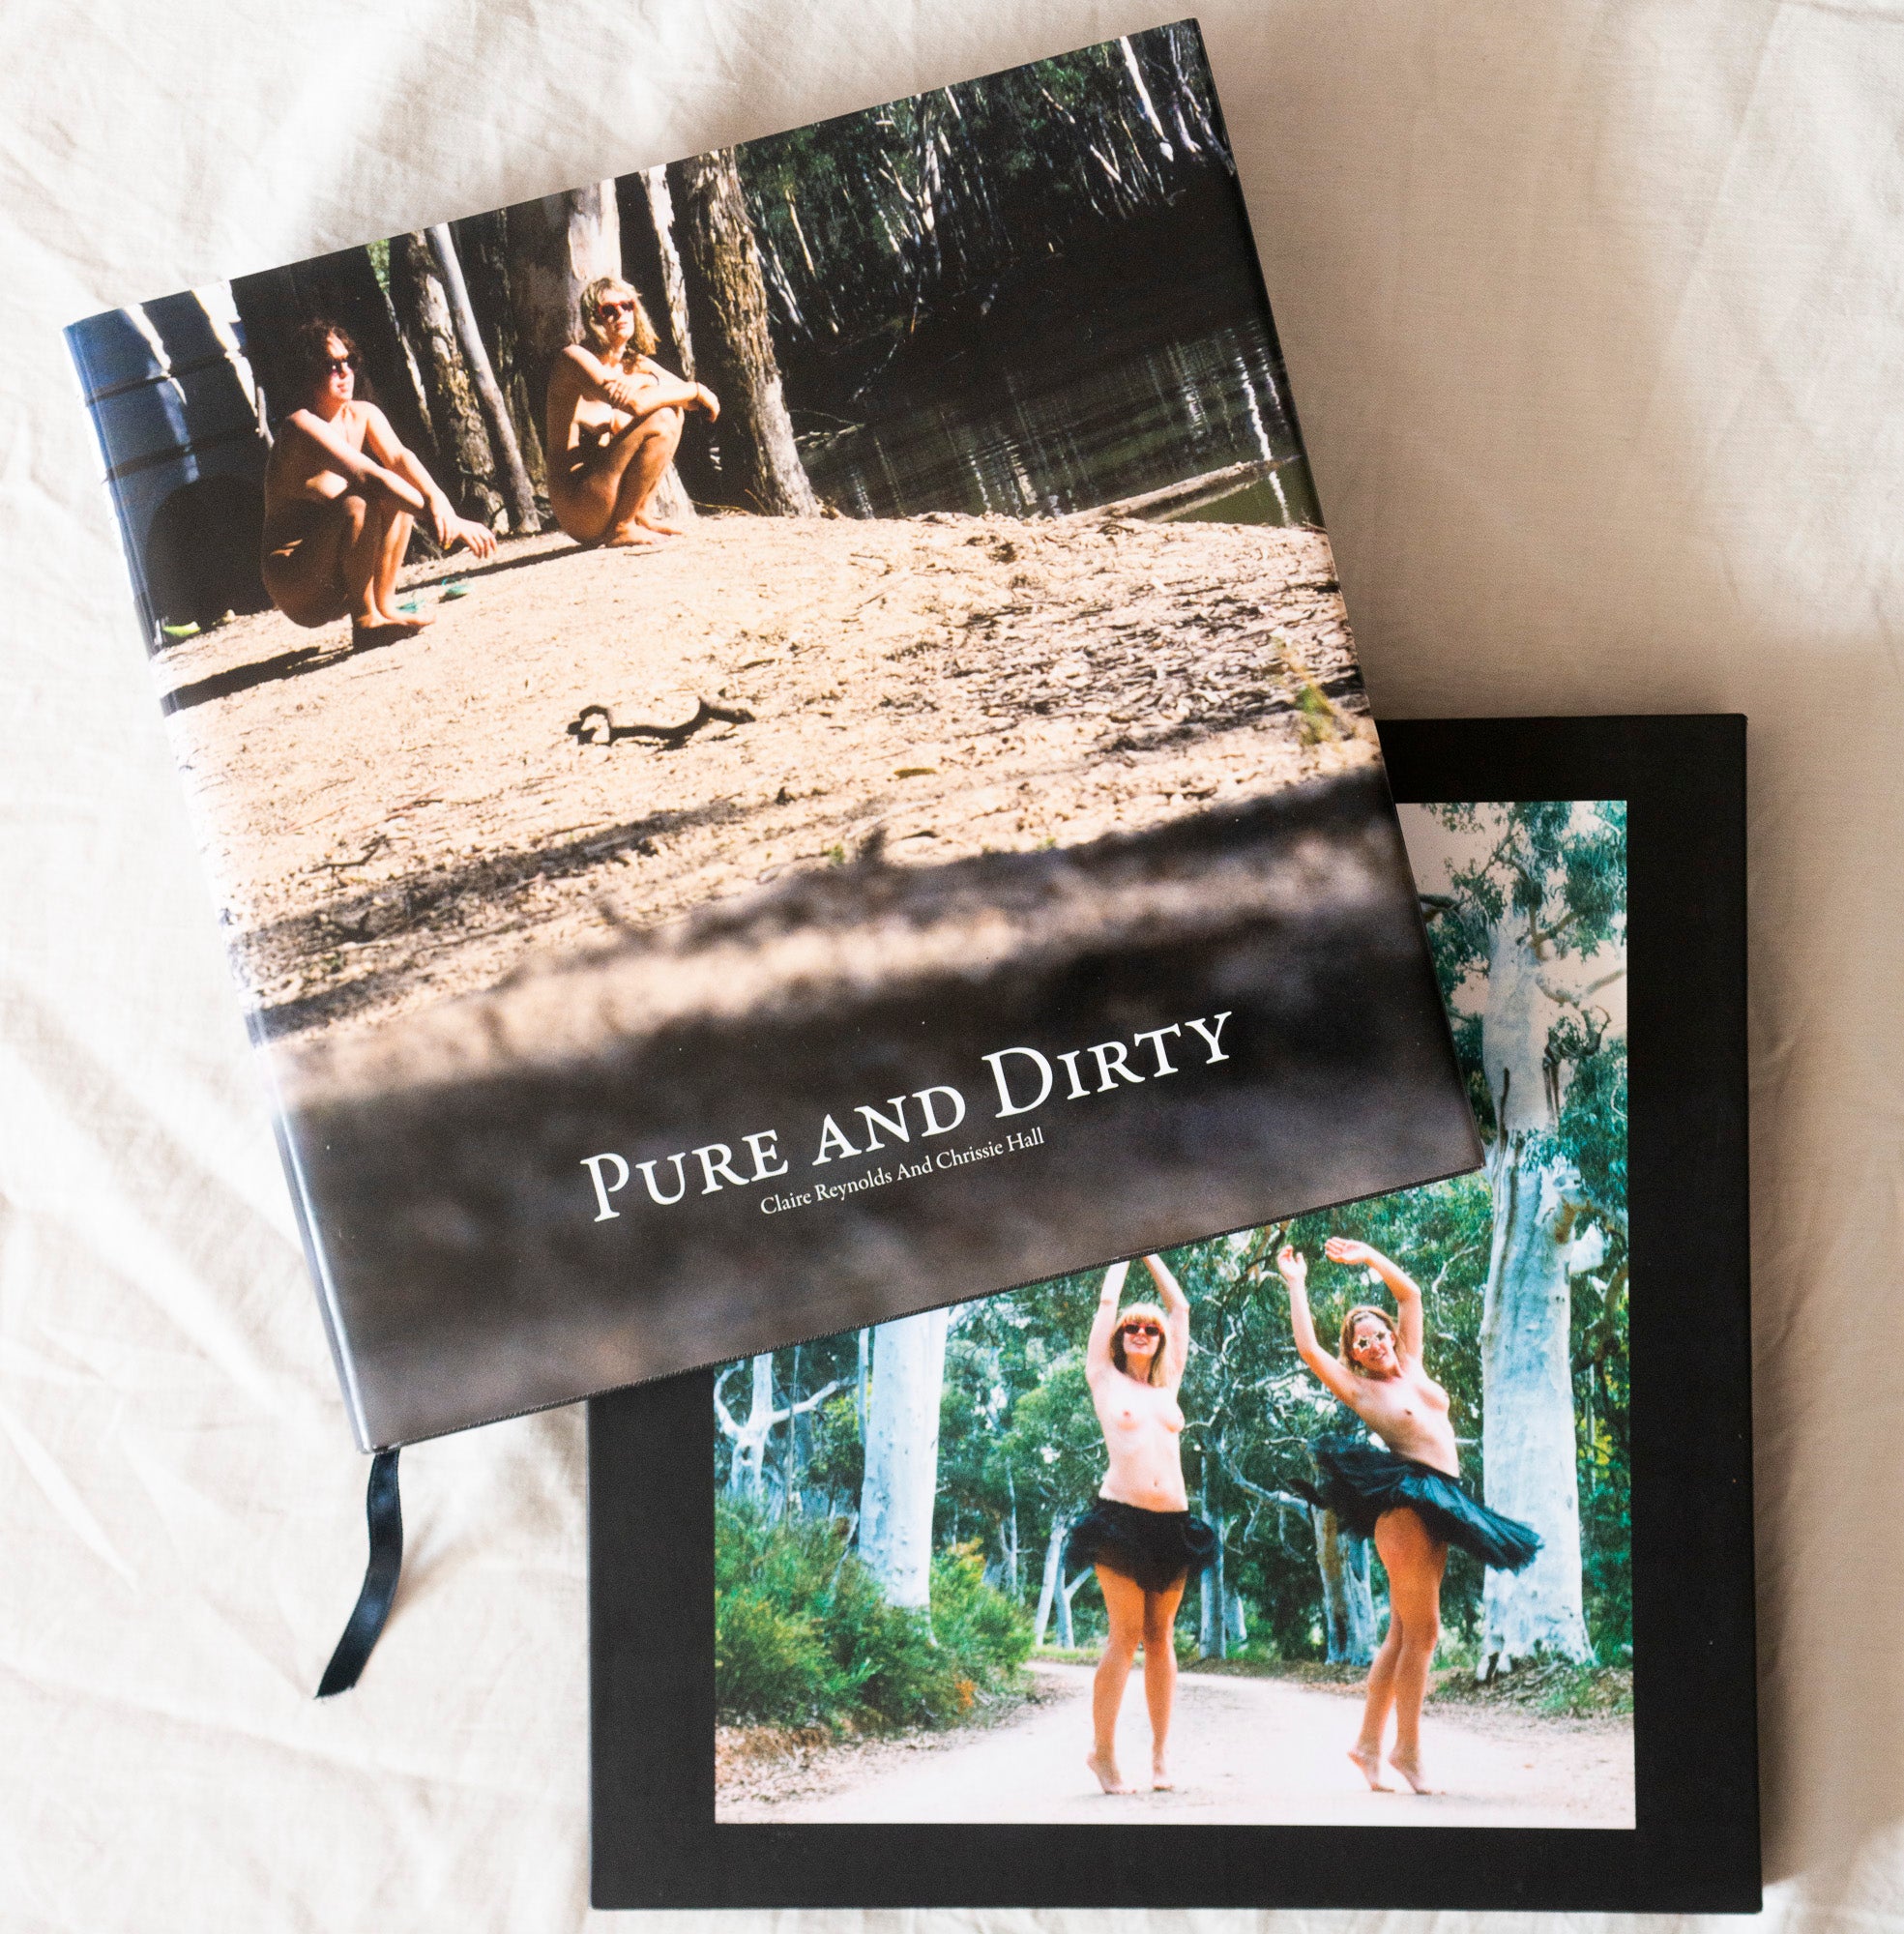 Pure and Dirty "The Book" Special Limited Edition